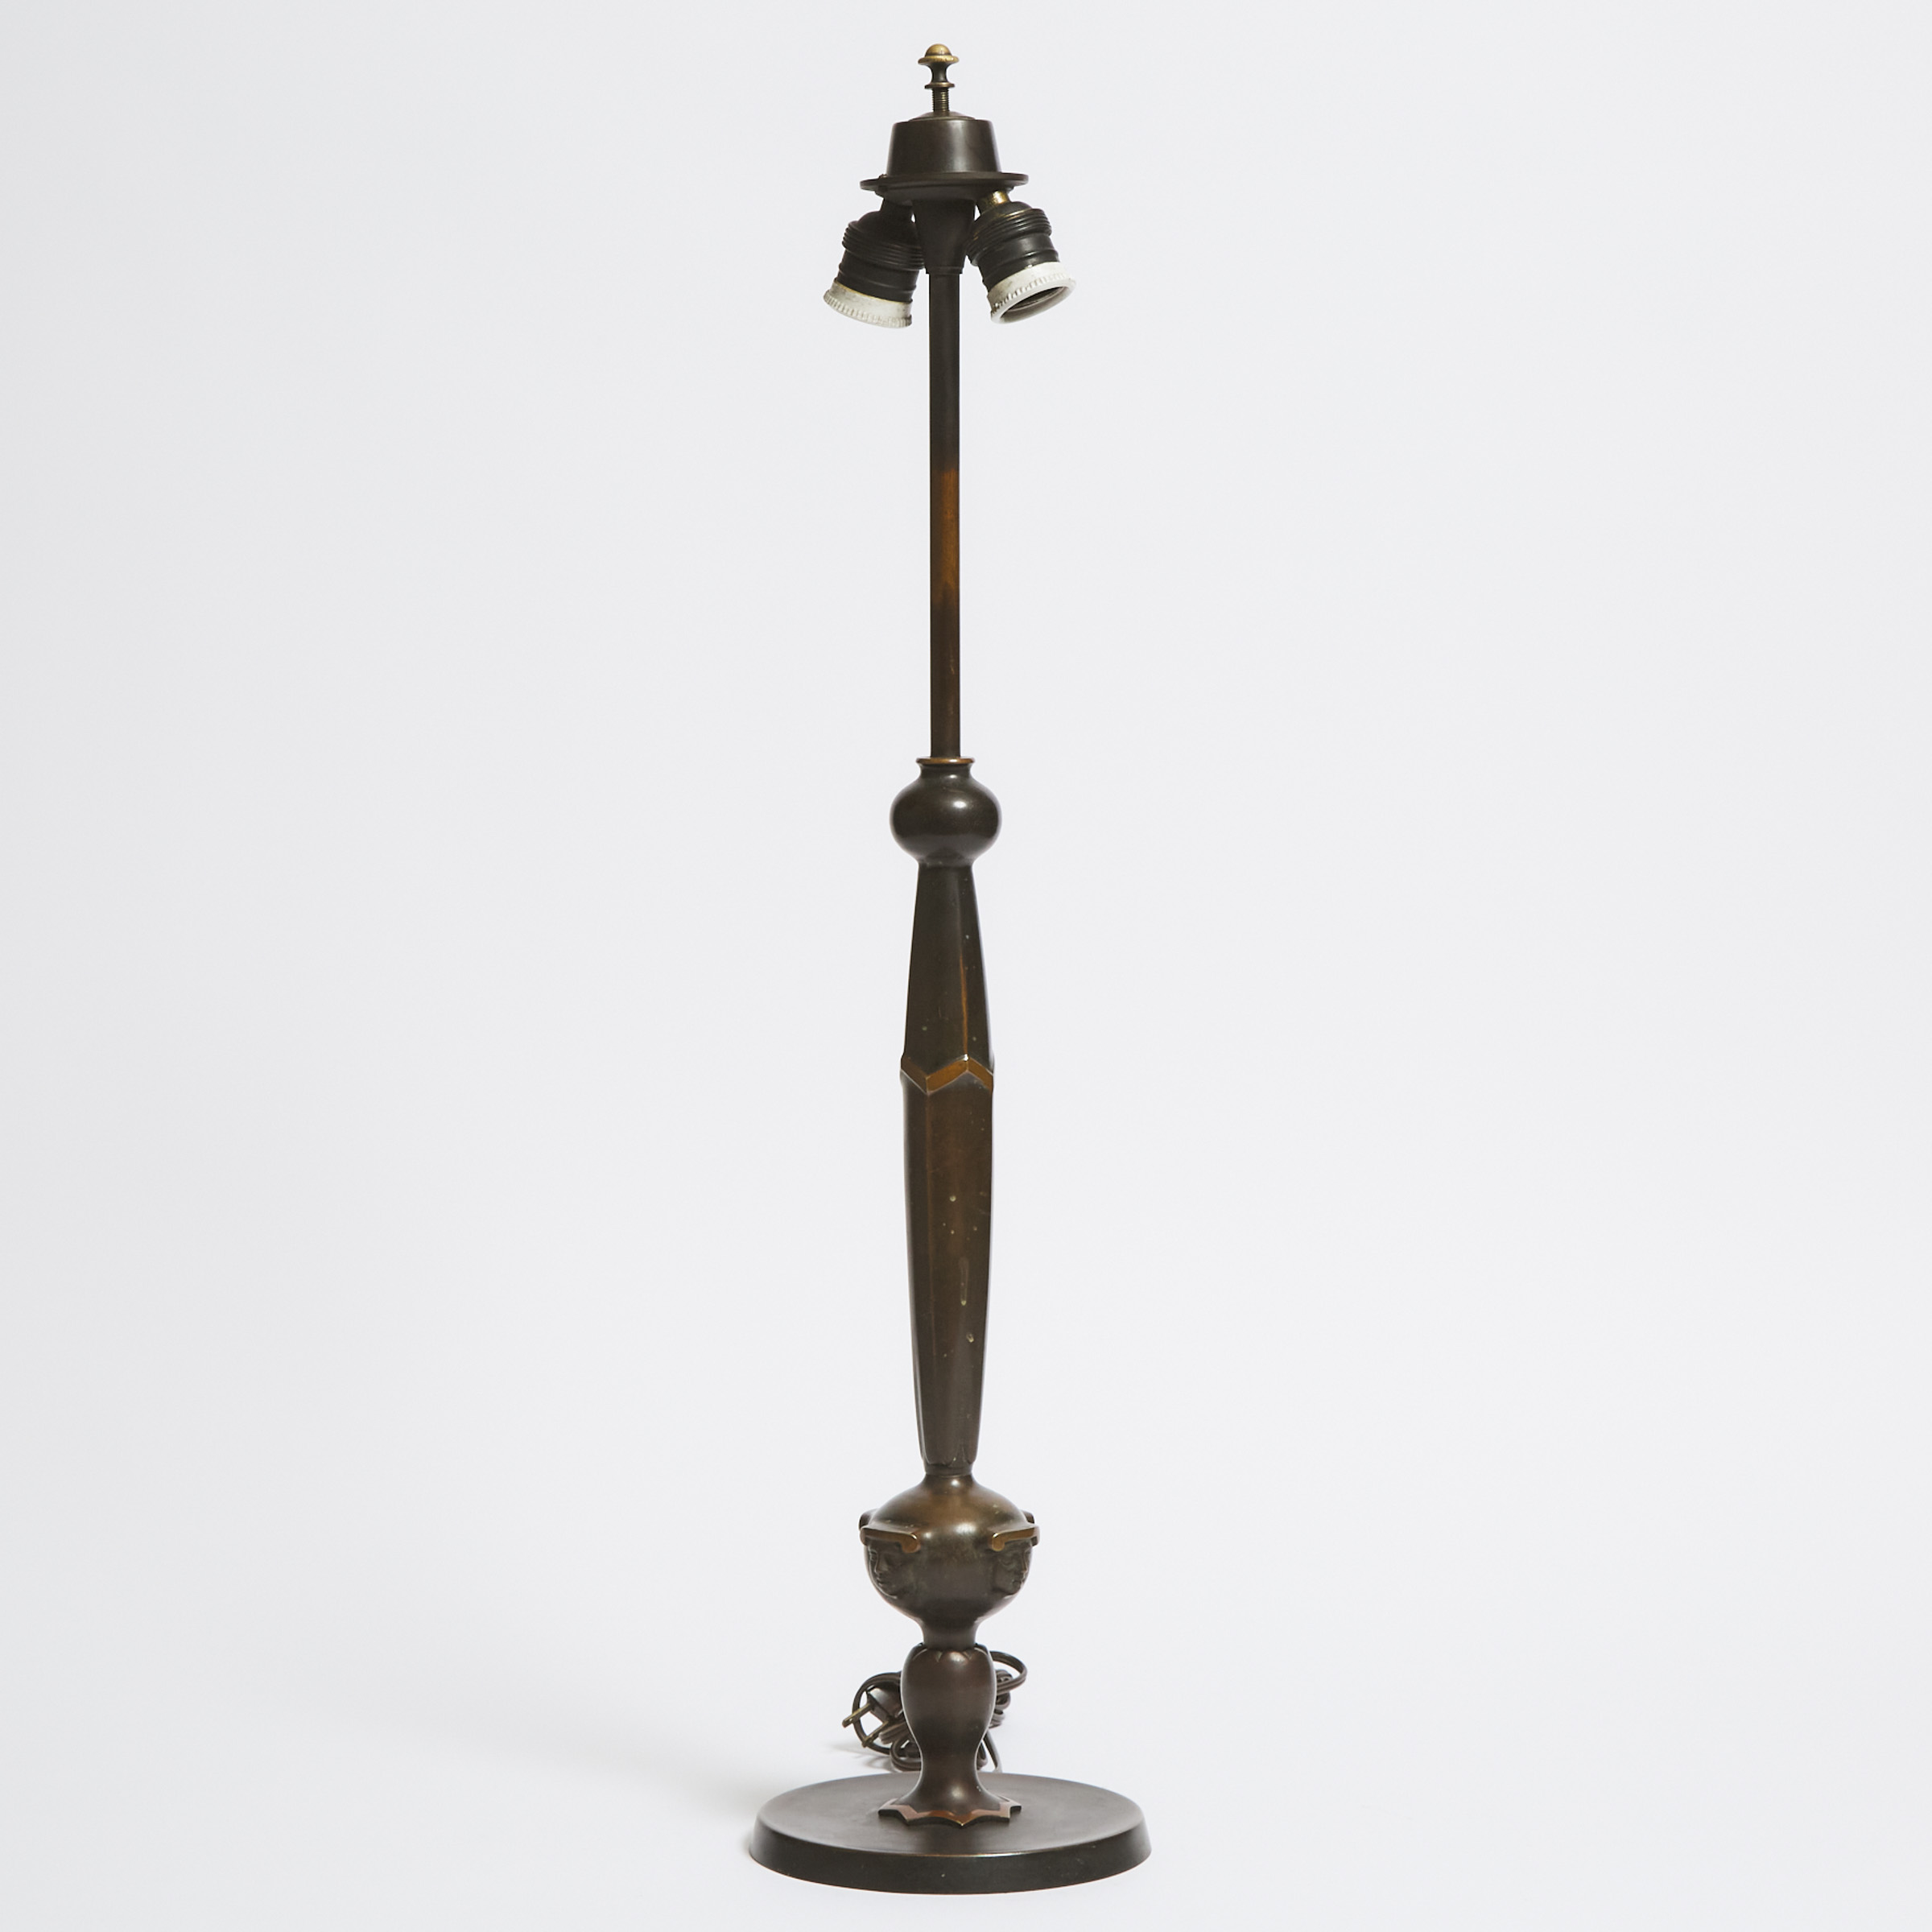 American Avant Garde Art Deco Patinated Bronze Table Lamp with Masks, c.1920